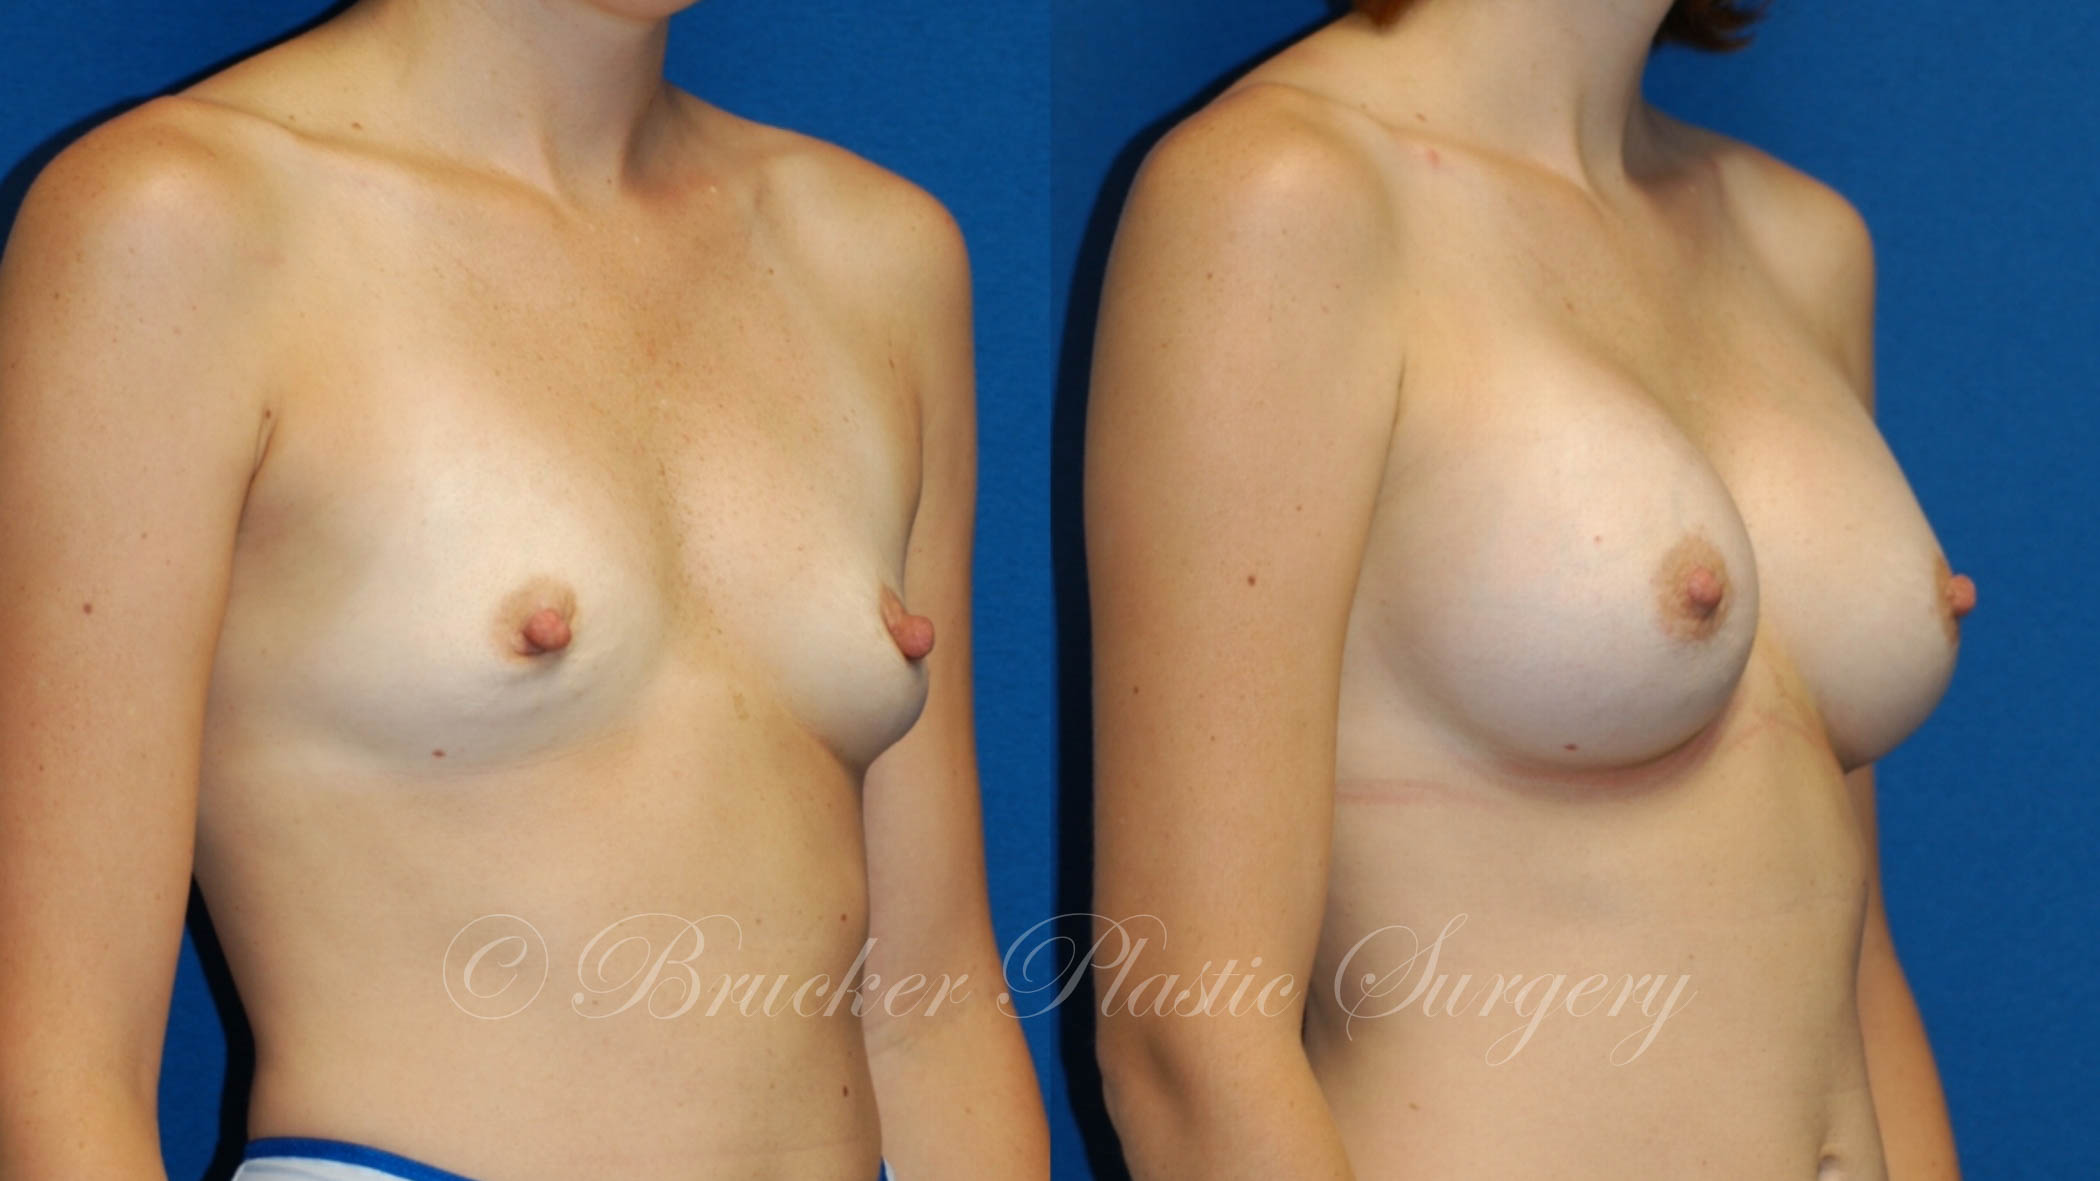 Patient 2b Breast Augmentation Before and After